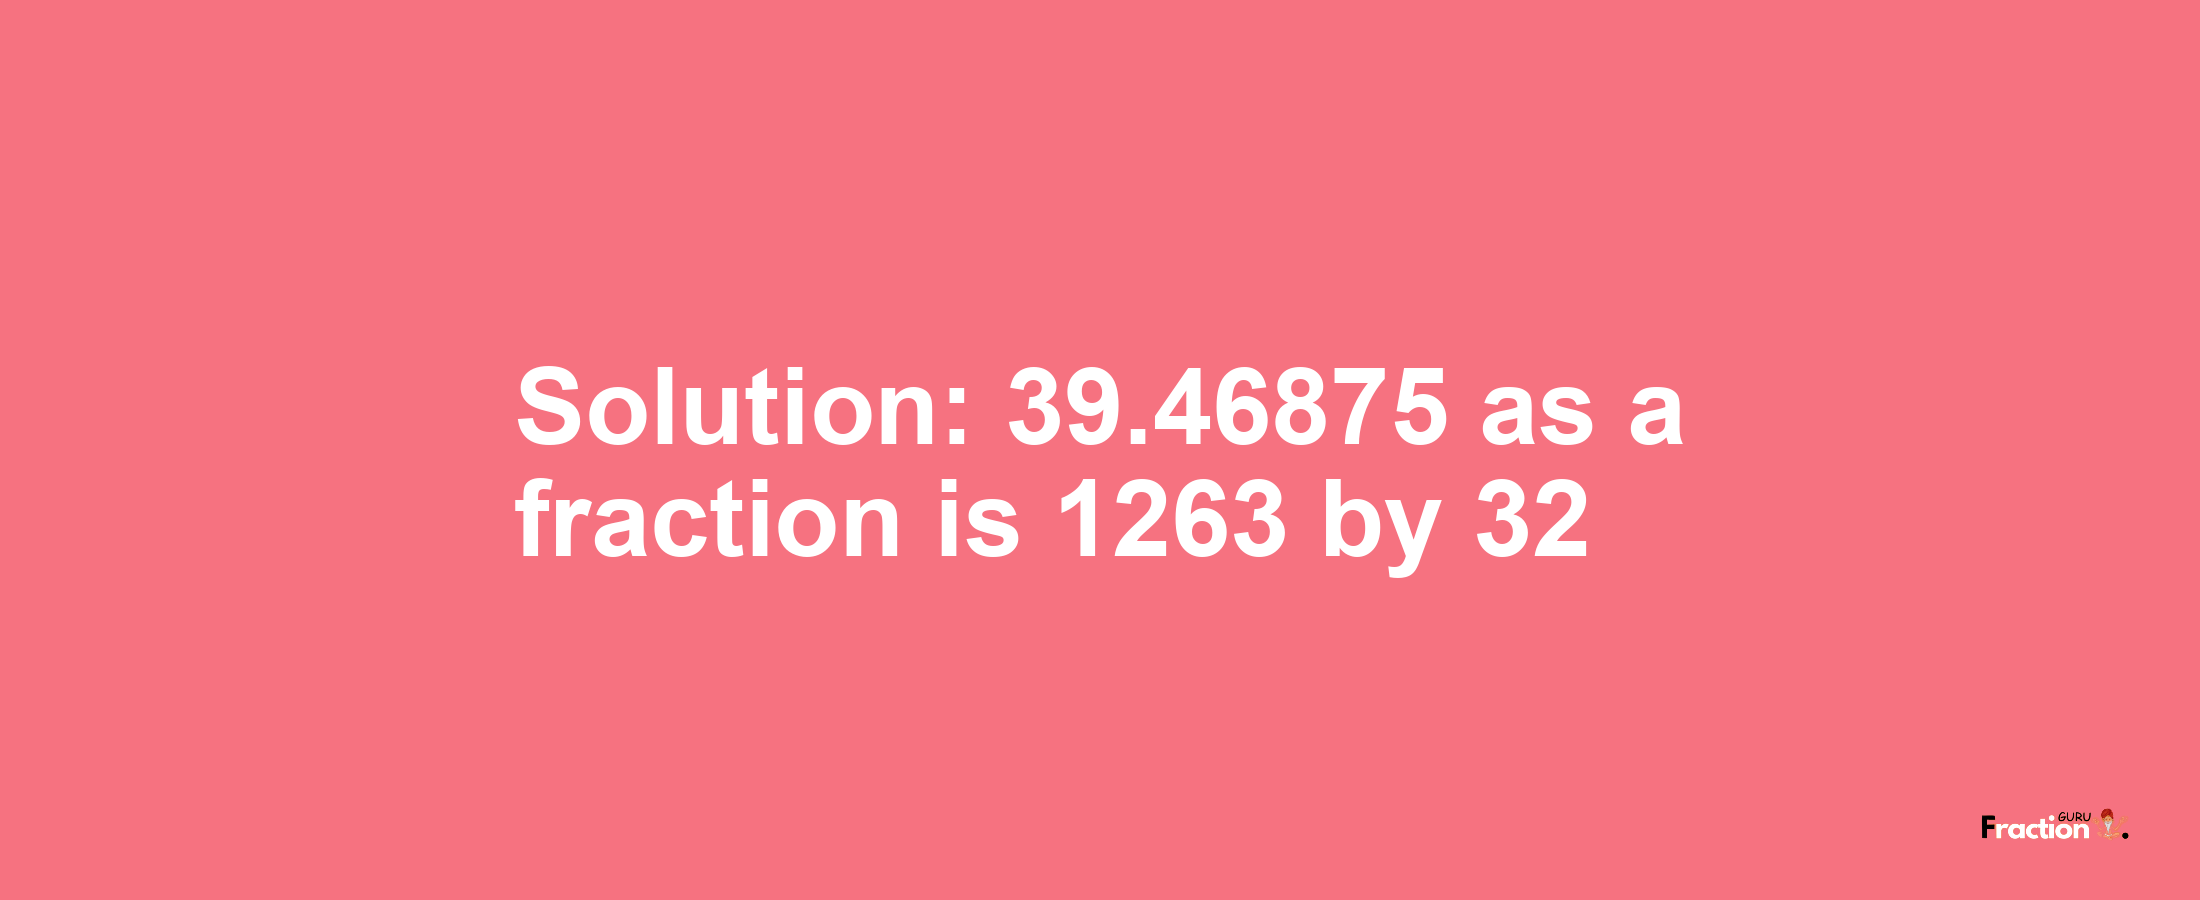 Solution:39.46875 as a fraction is 1263/32